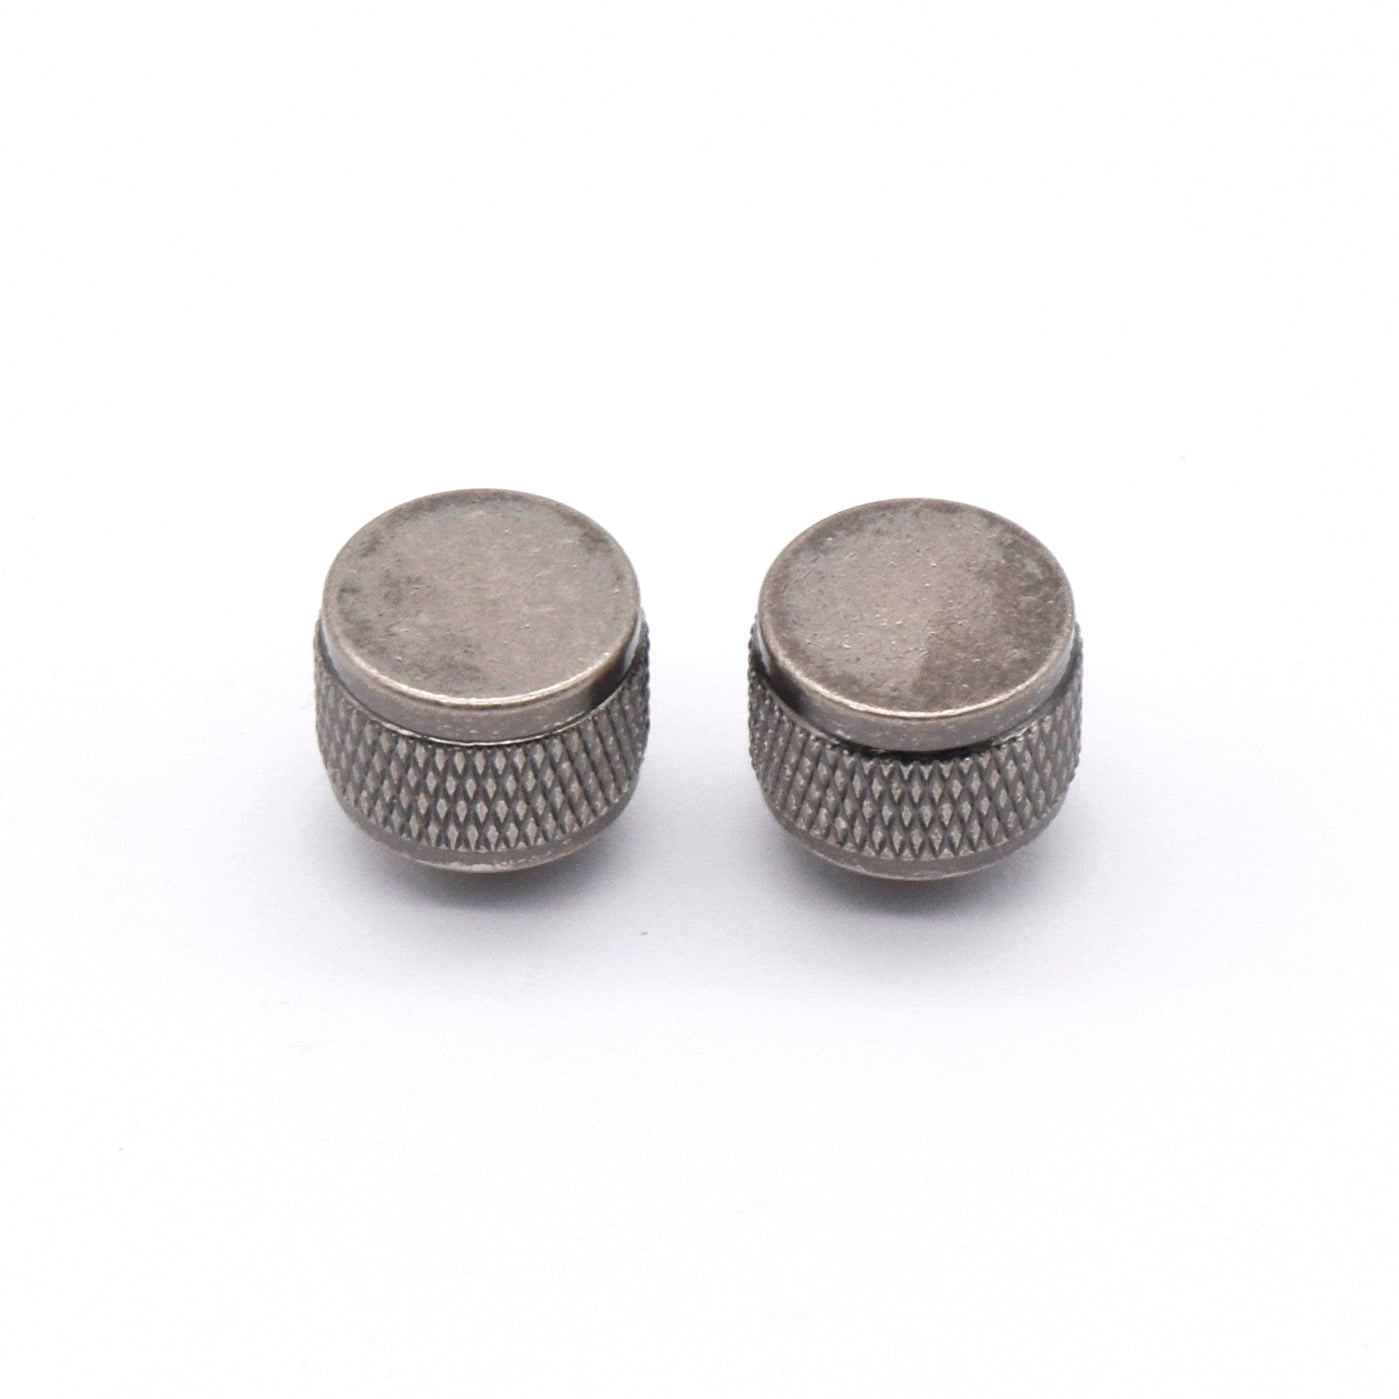 KD By AxLabs Threaded Strap Buttons (2) - Gretsch® Style - AxLabs